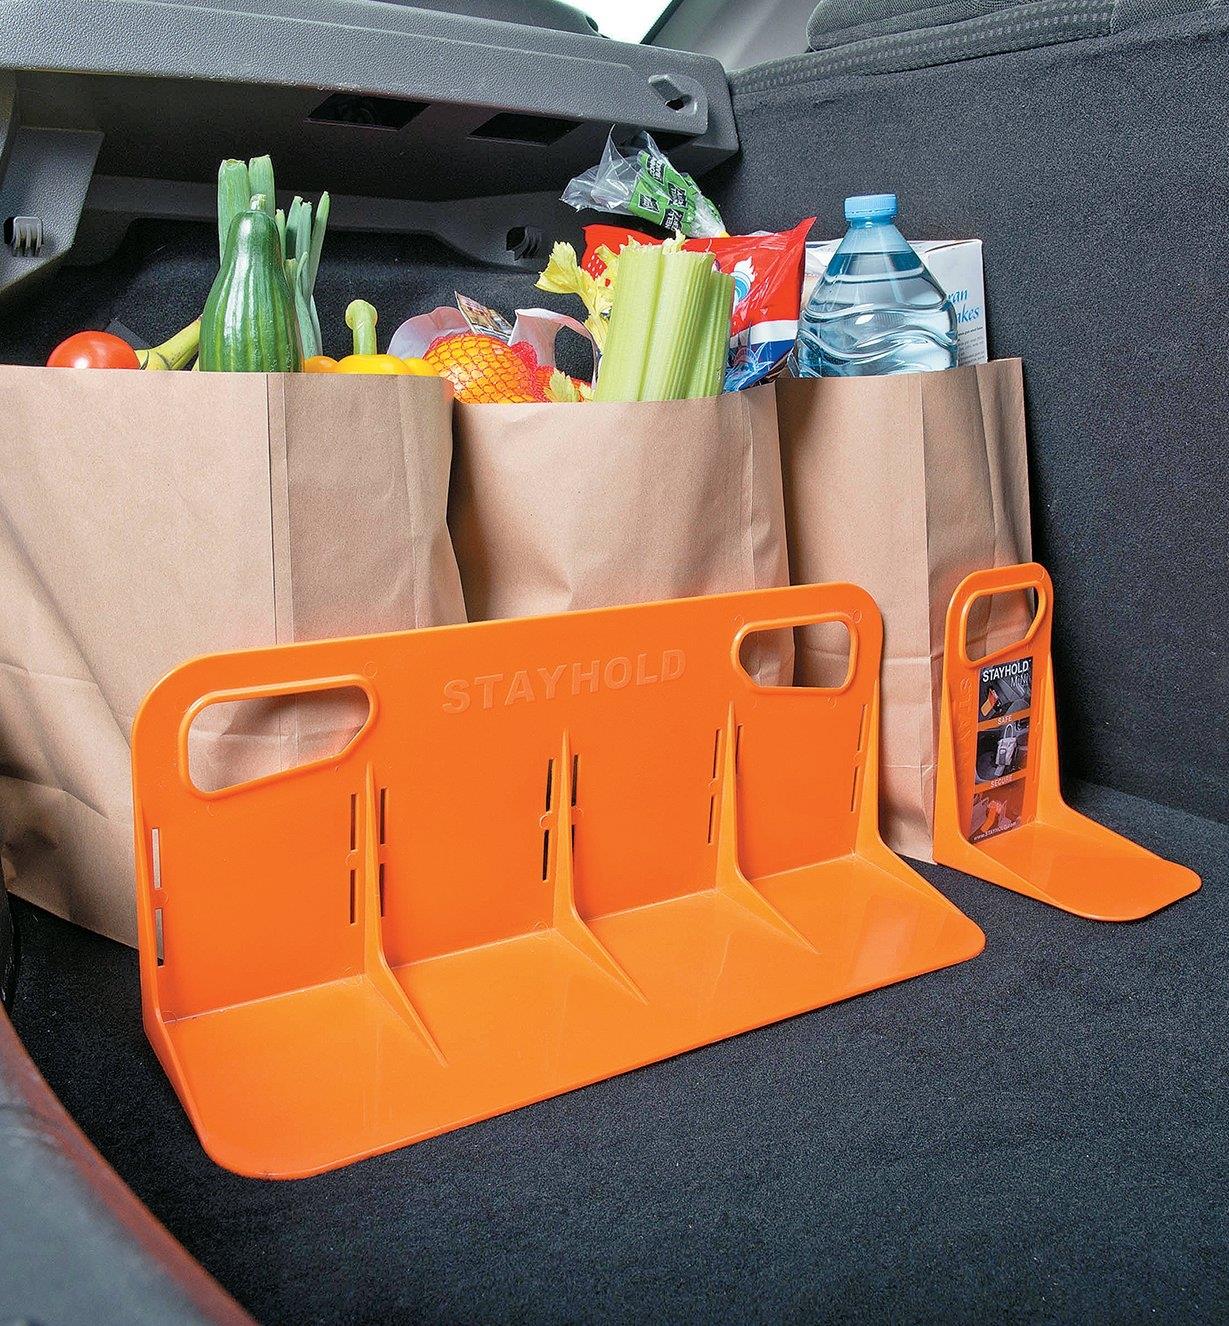 Modular Cargo Organizer supporting bags of groceries in a car trunk